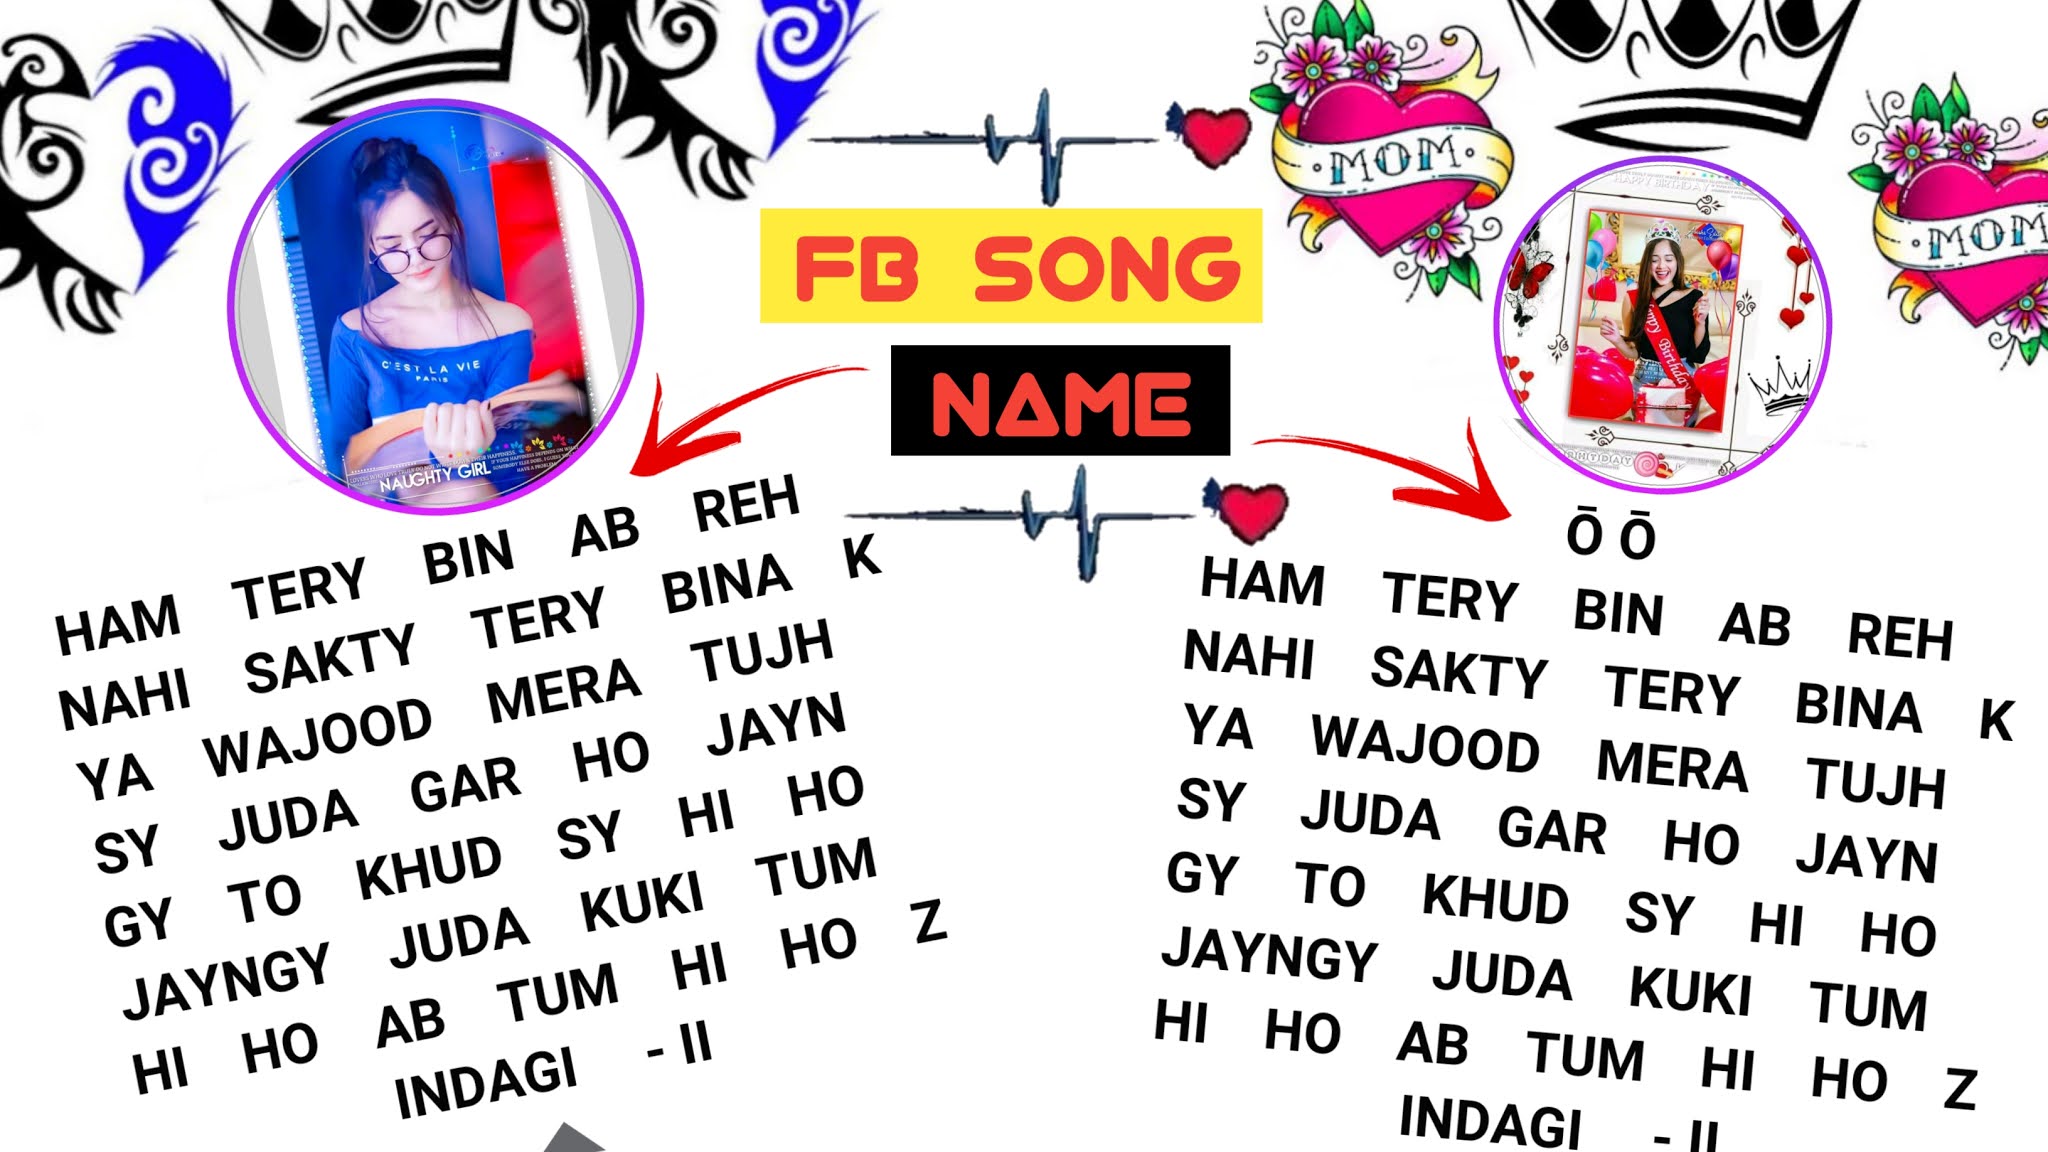 Facebook song account, fb song name id